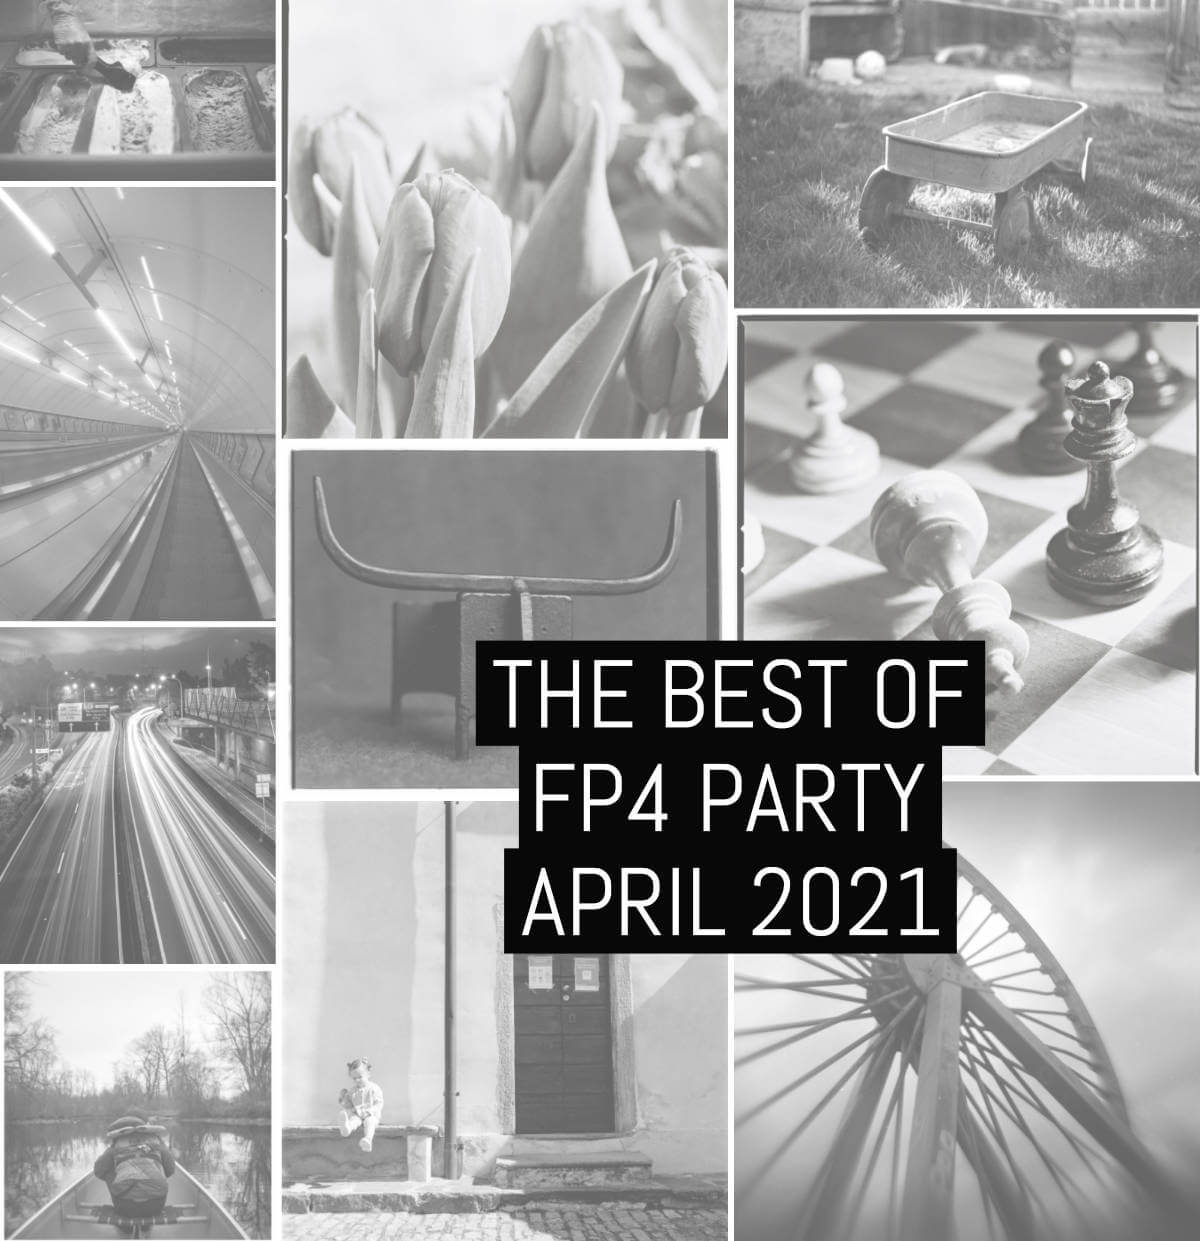 The best of #FP4Party April 2021